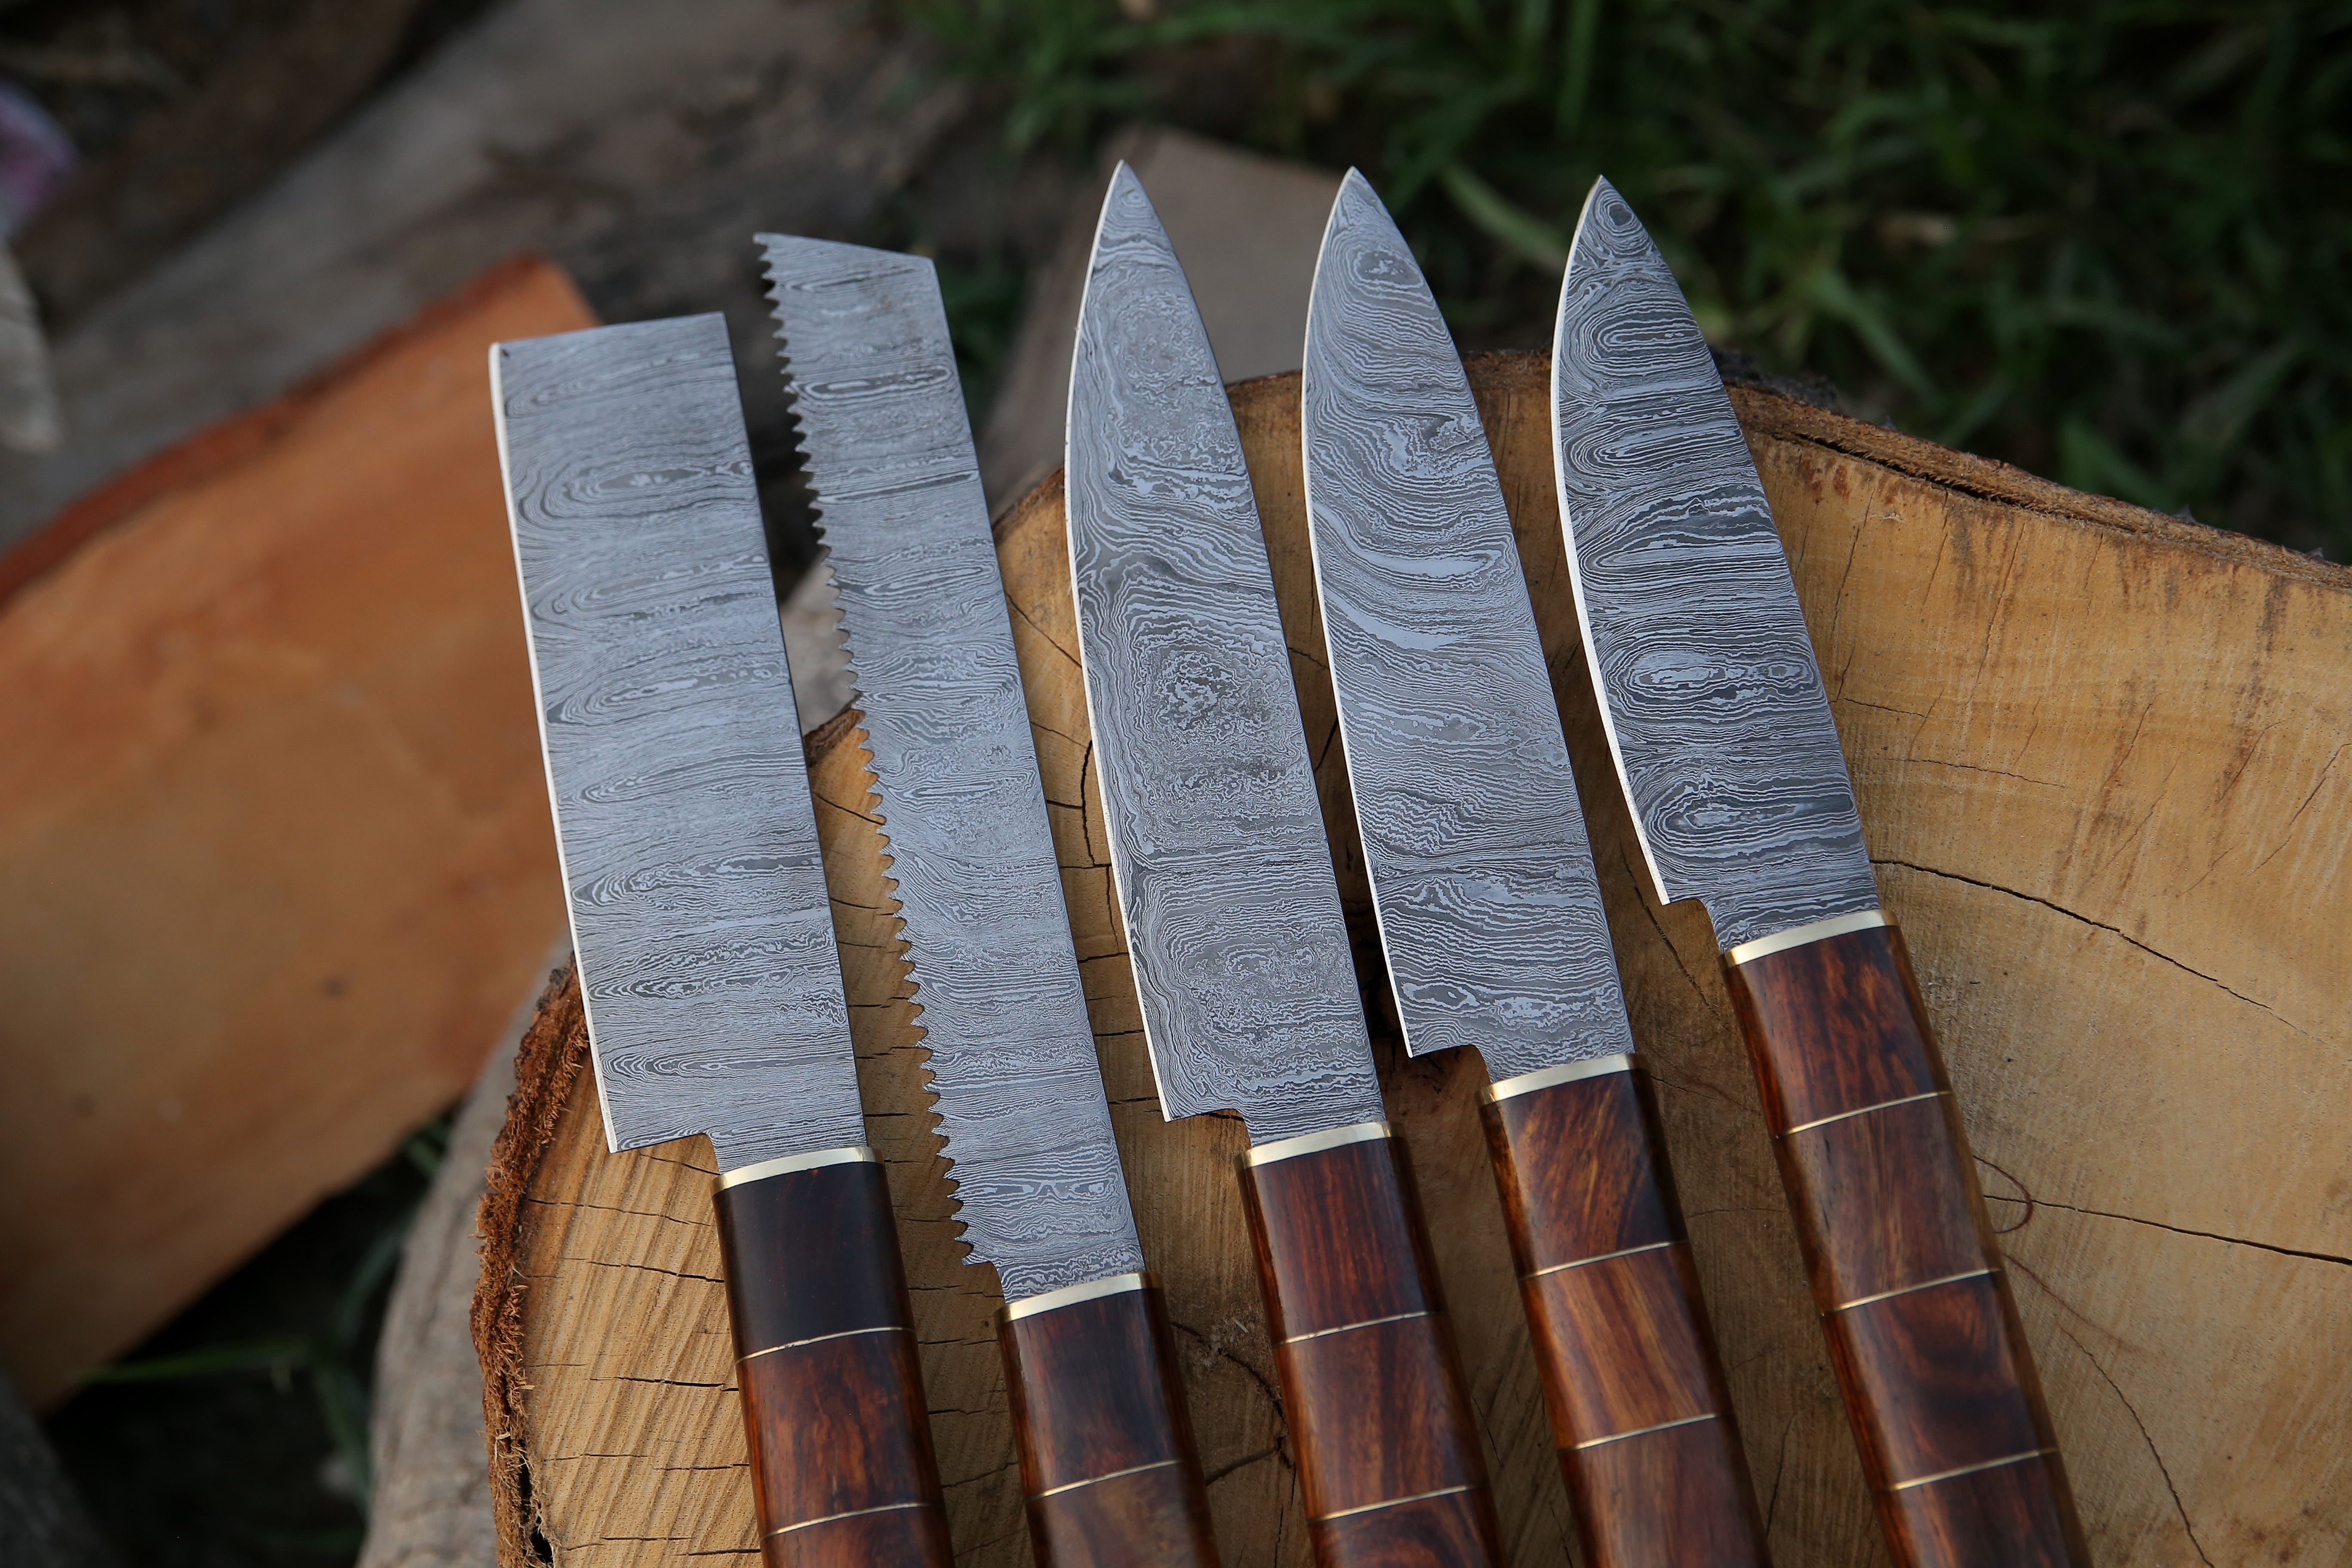 Custom Made Damascus Steel Kitchen Knife Rosewood Handle Handmade Chef knife Set Of 5 PCS With Leather Kit.